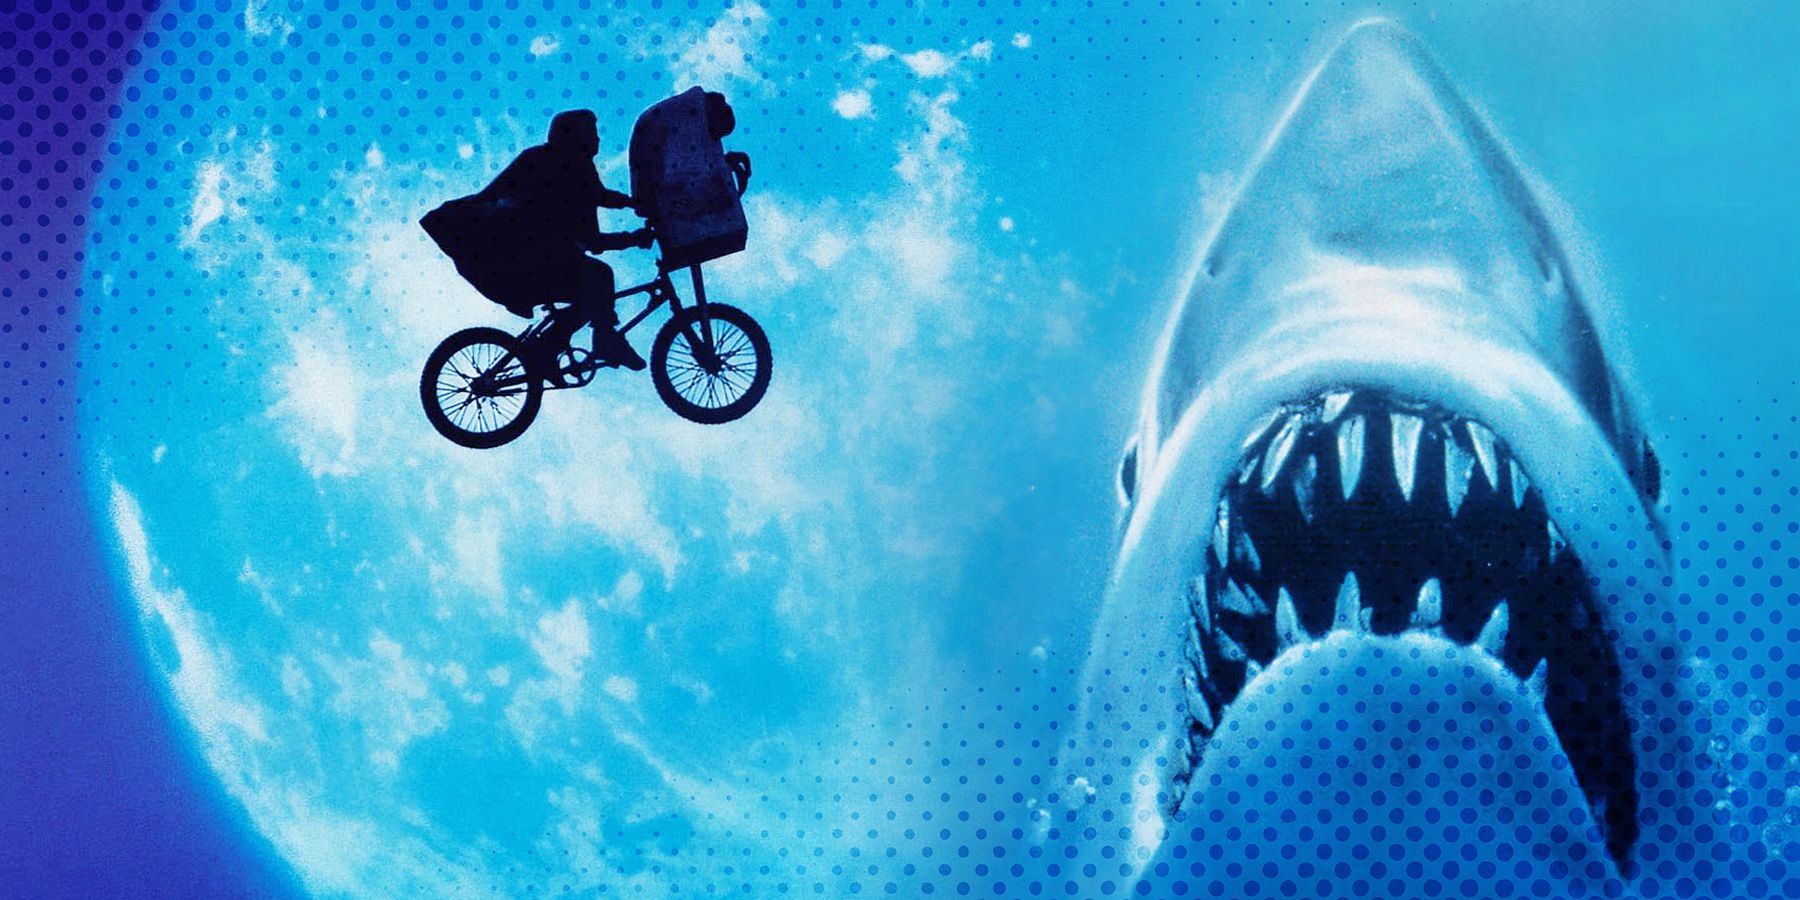 A silhouette of the flying bicycle from E.T. and a shark rising to the surface from the movie poster of JAWS